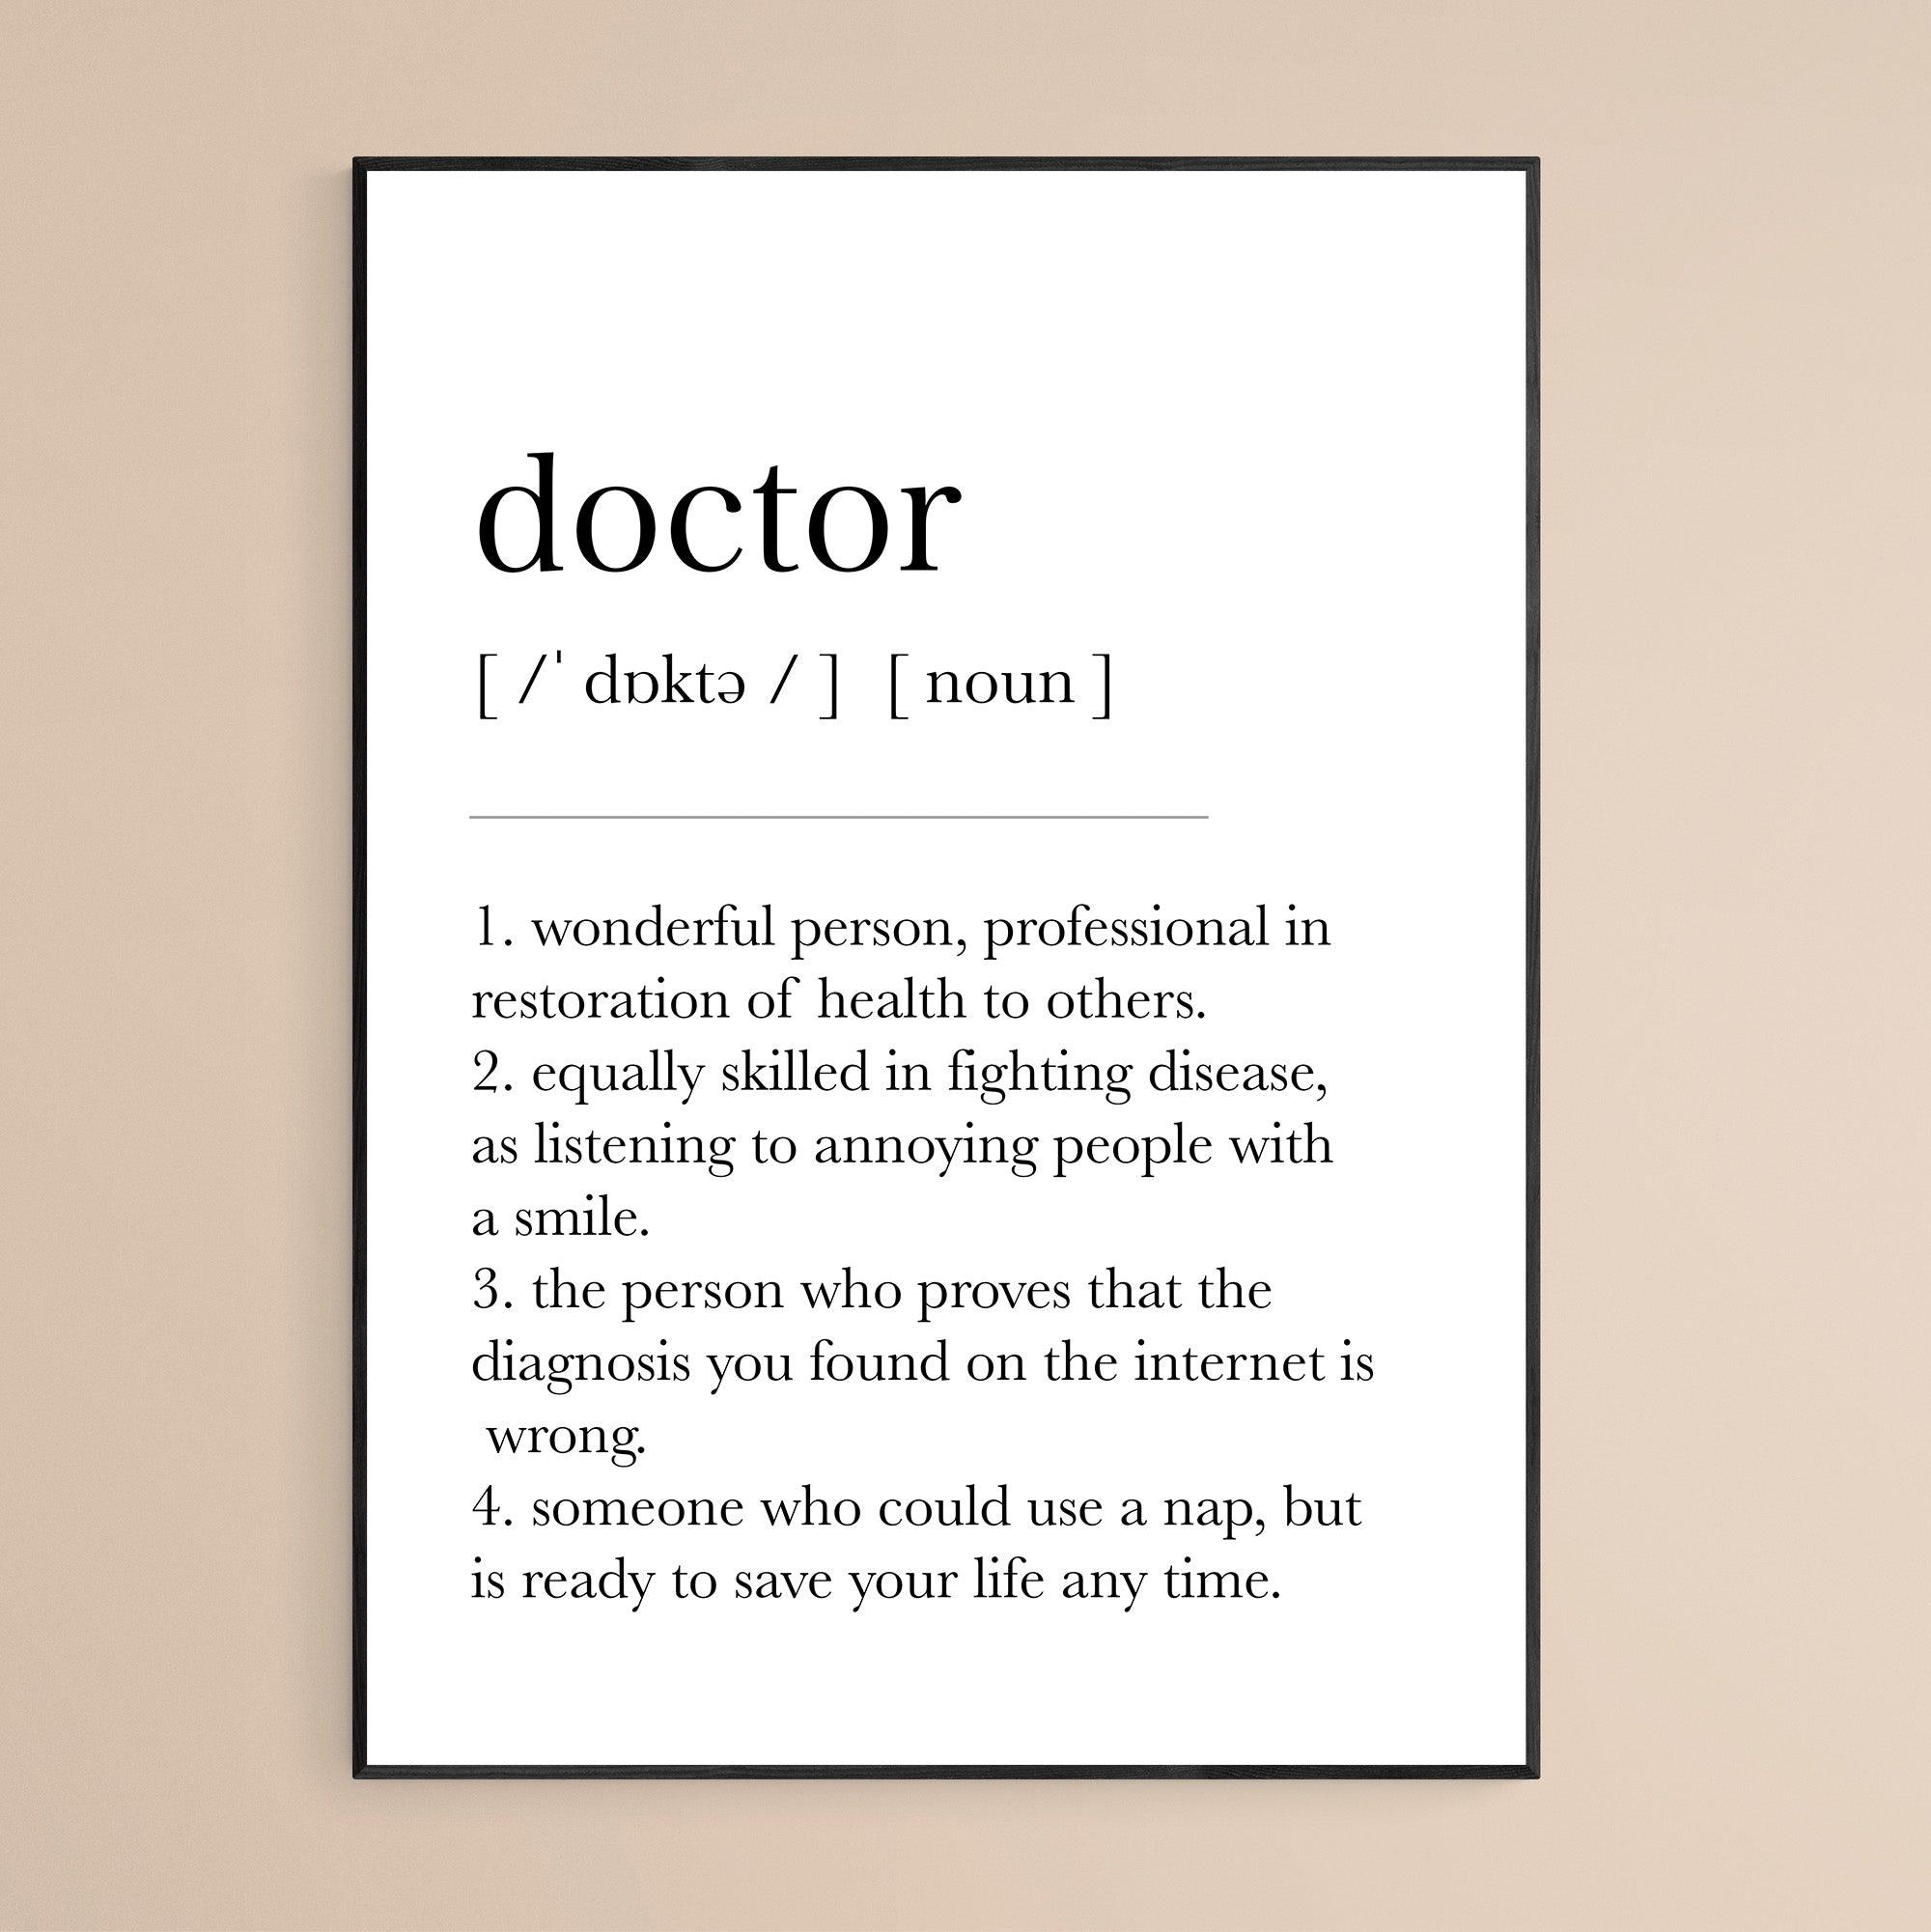 DOCTOR definition and meaning